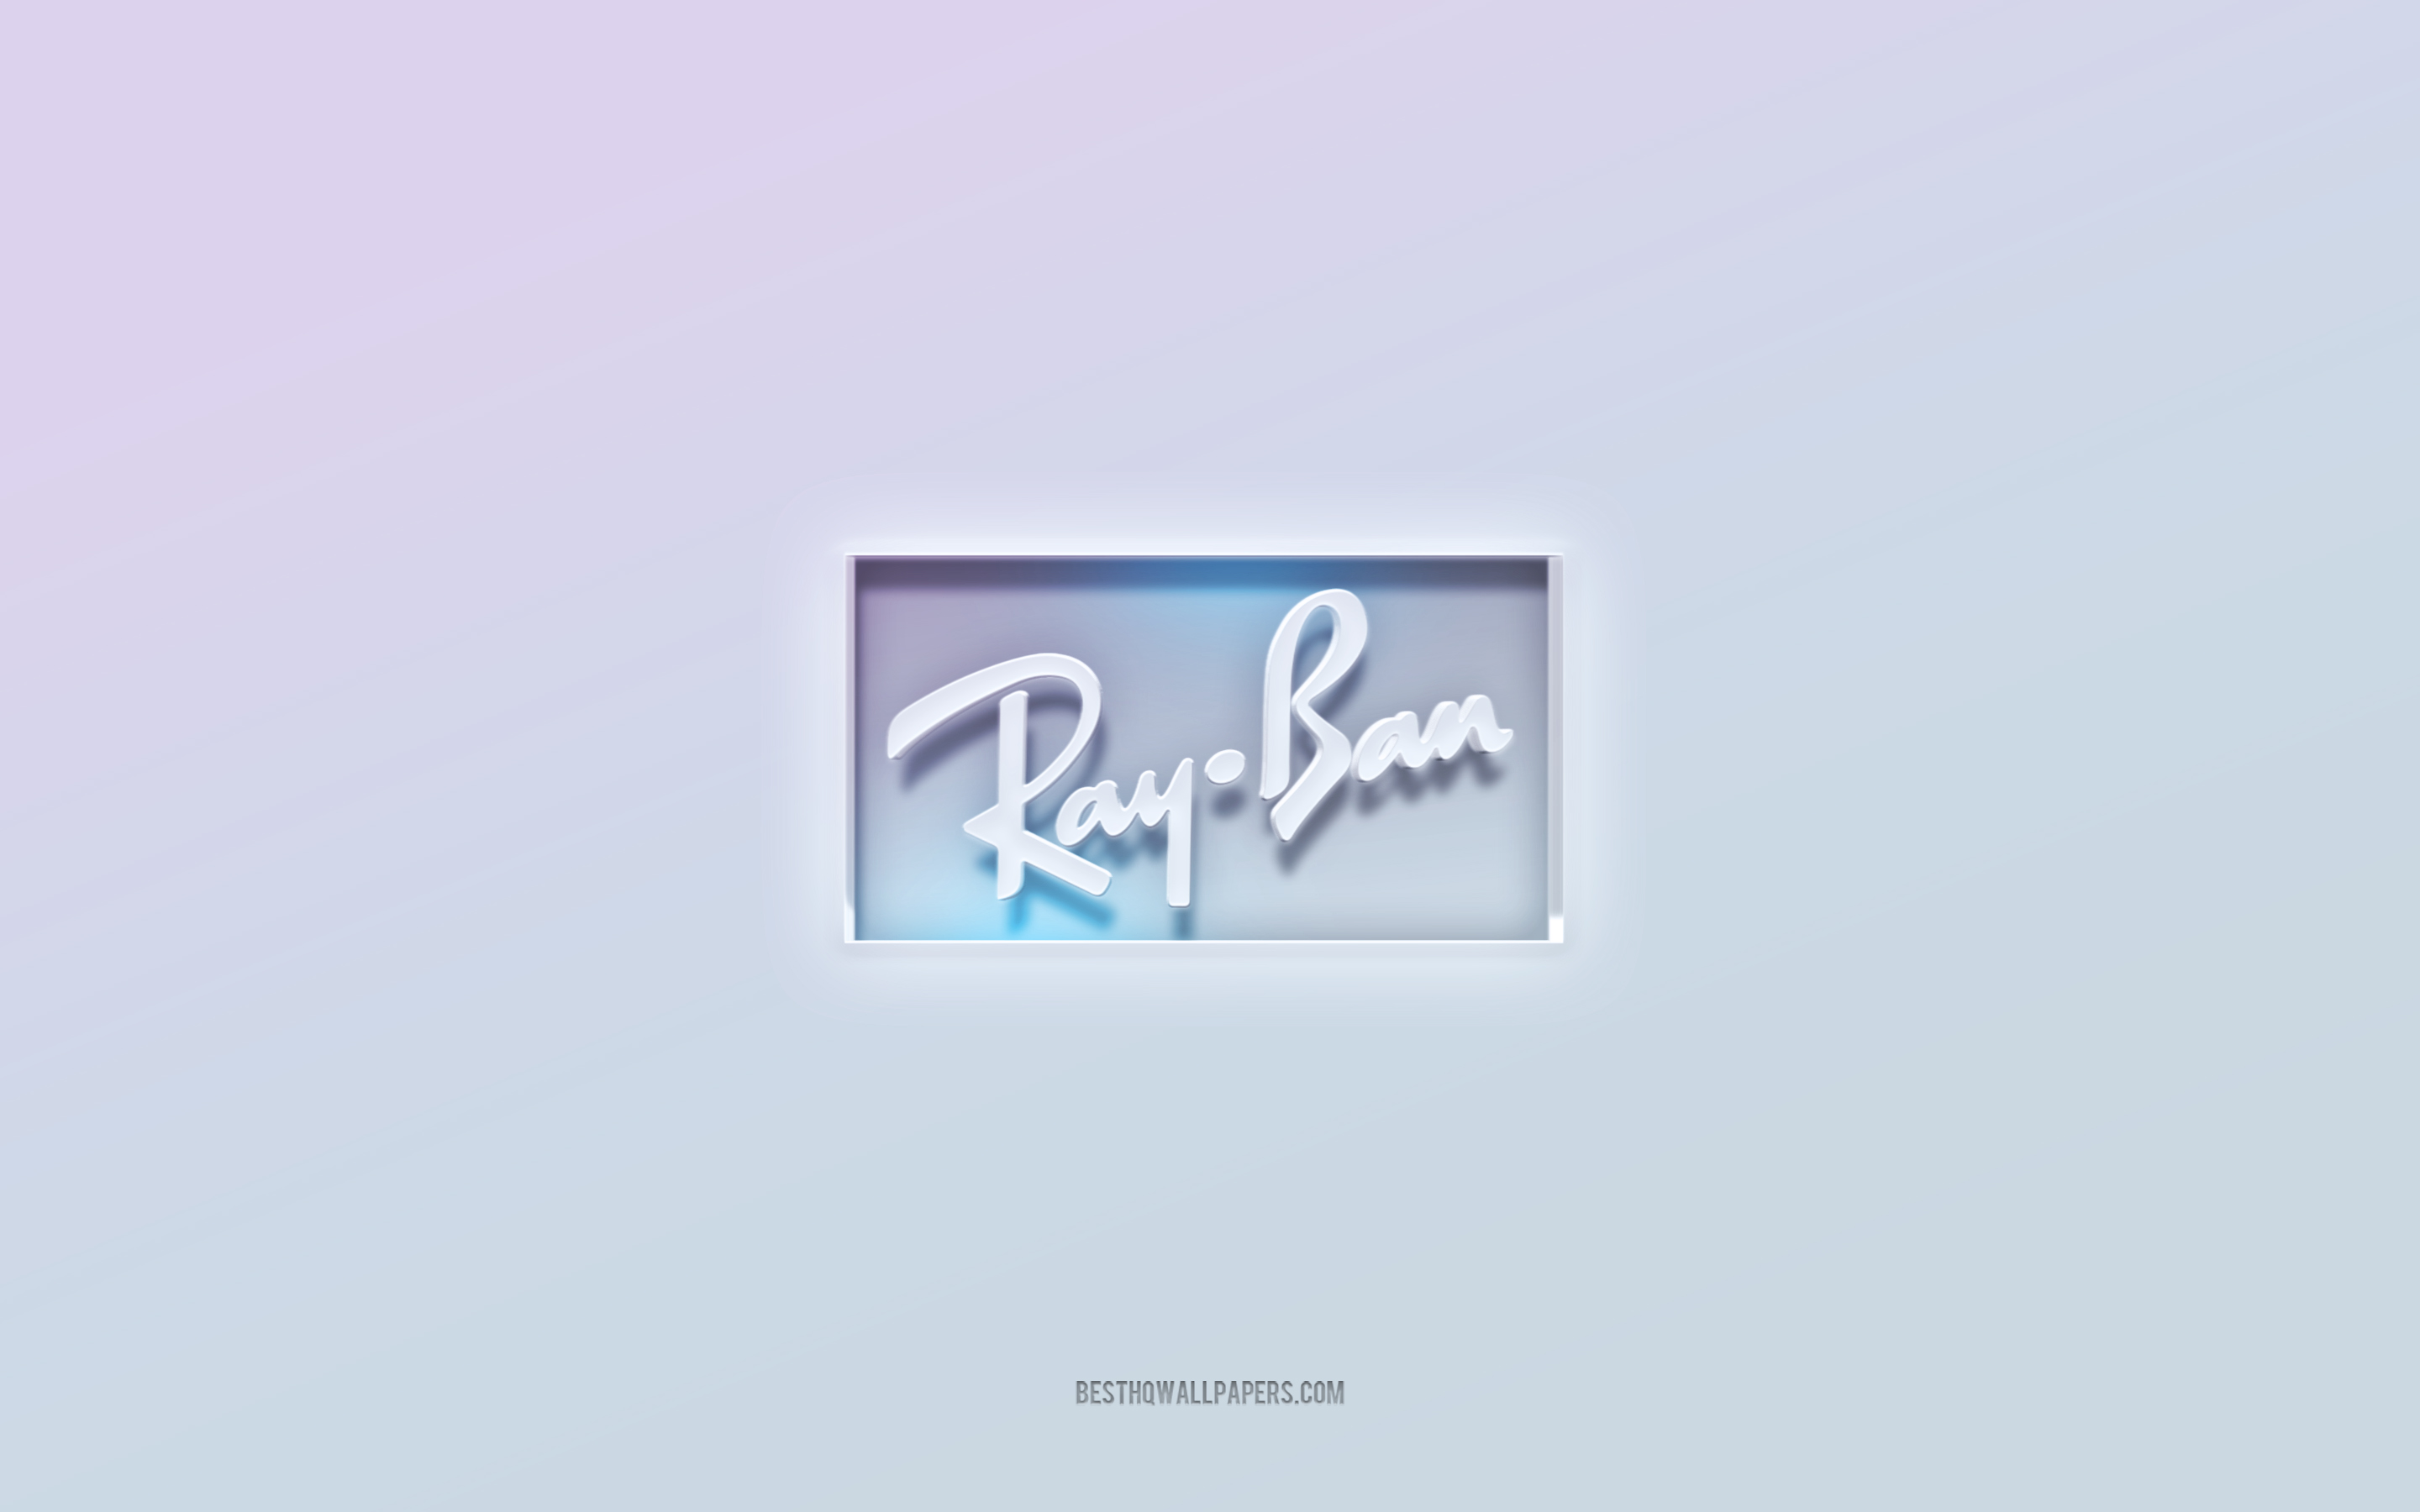 Ray-ban Projects | Photos, videos, logos, illustrations and branding on  Behance